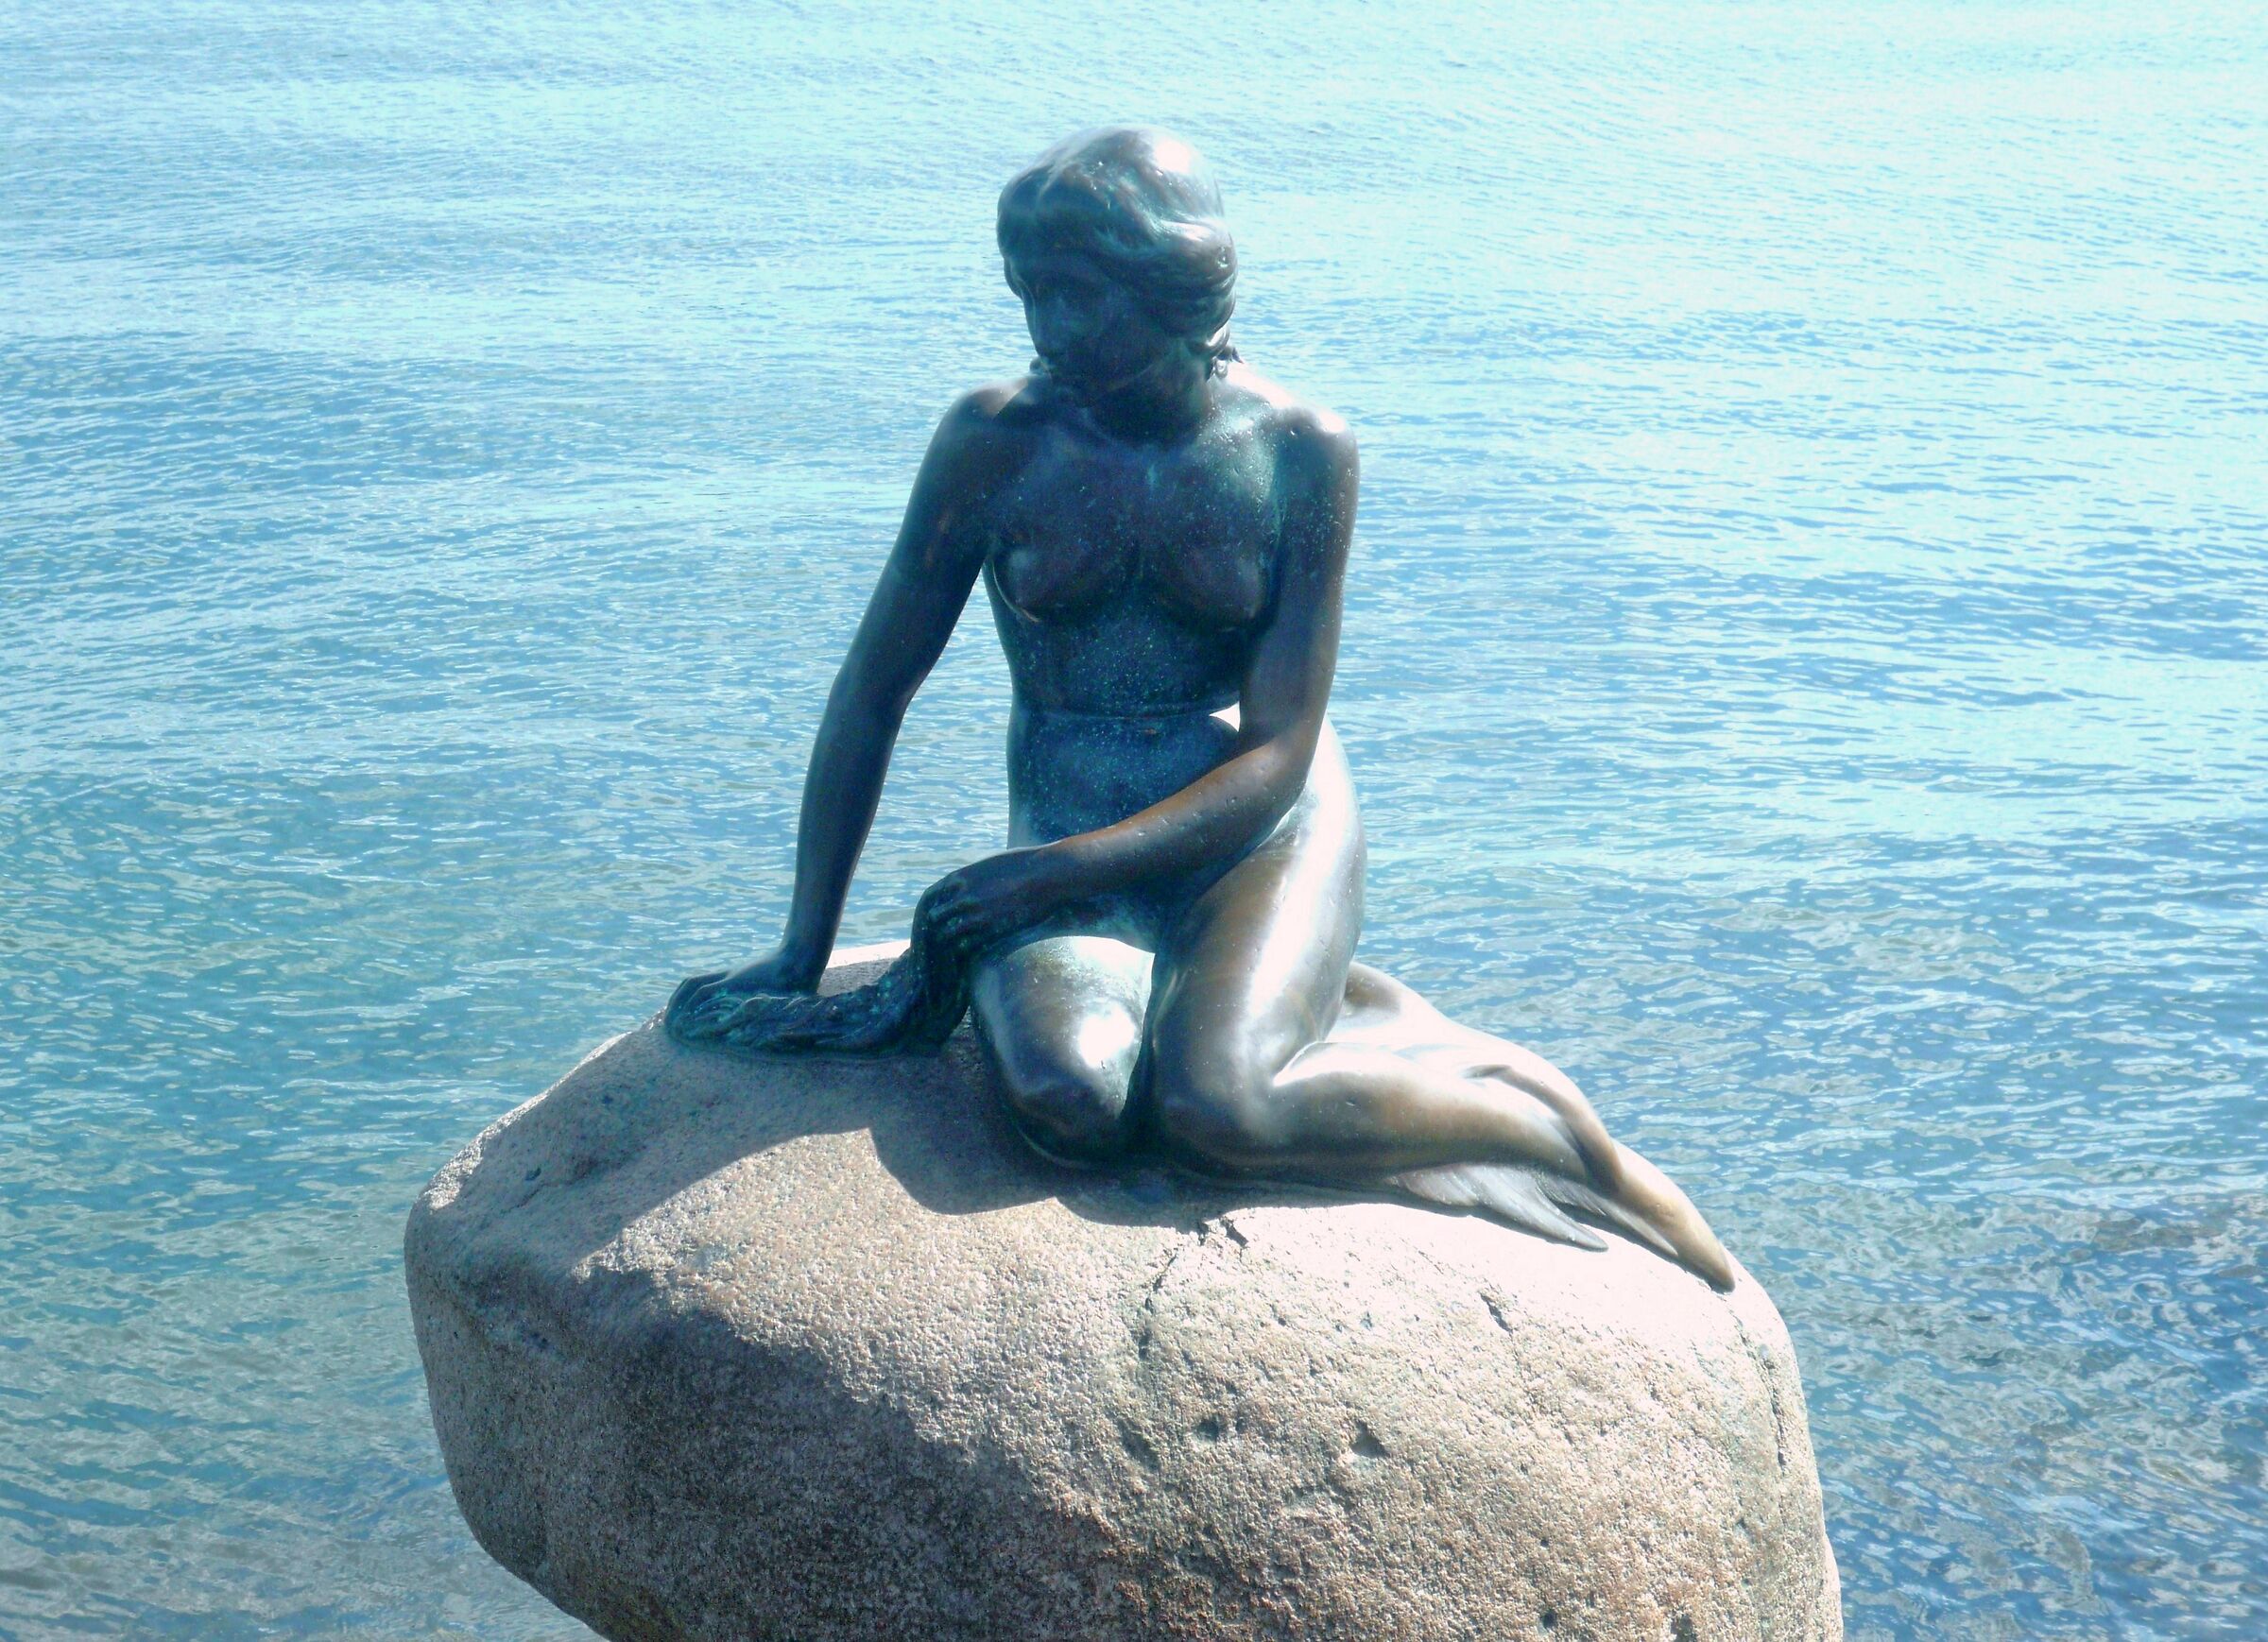 The Solitude of the Little Mermaid...